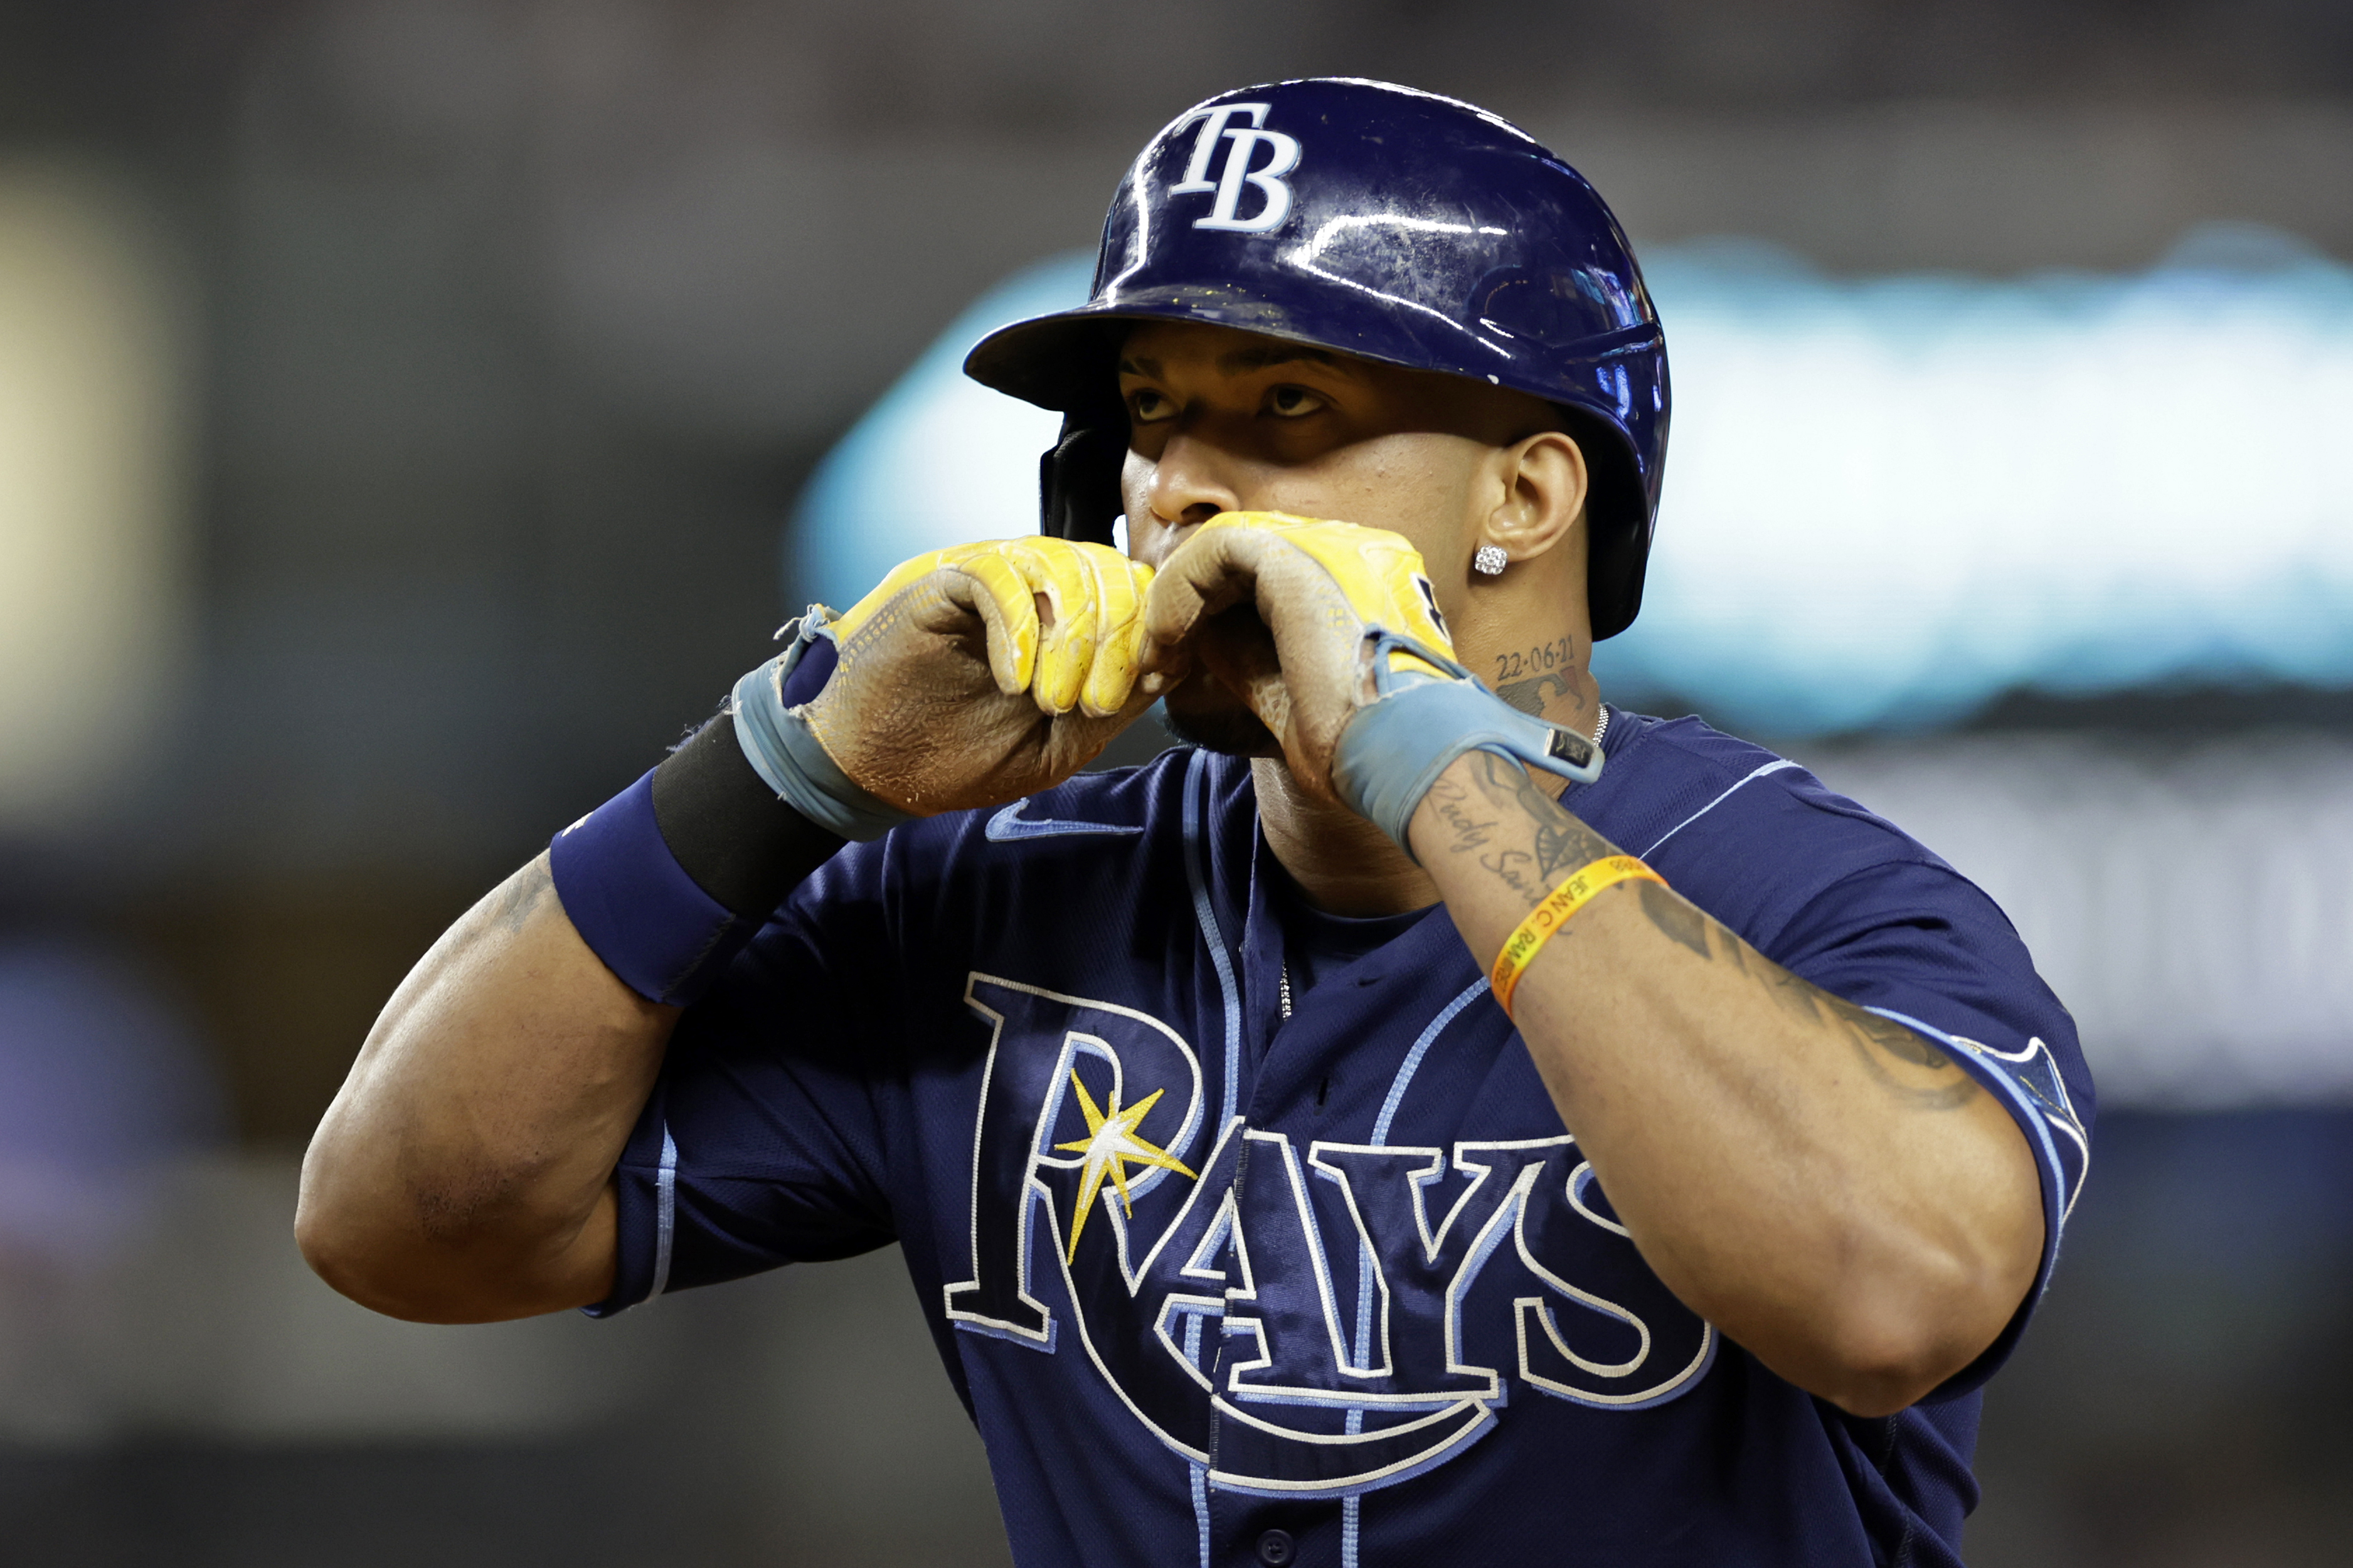 Wander Franco's arrival means rest, job shares for Rays infielders